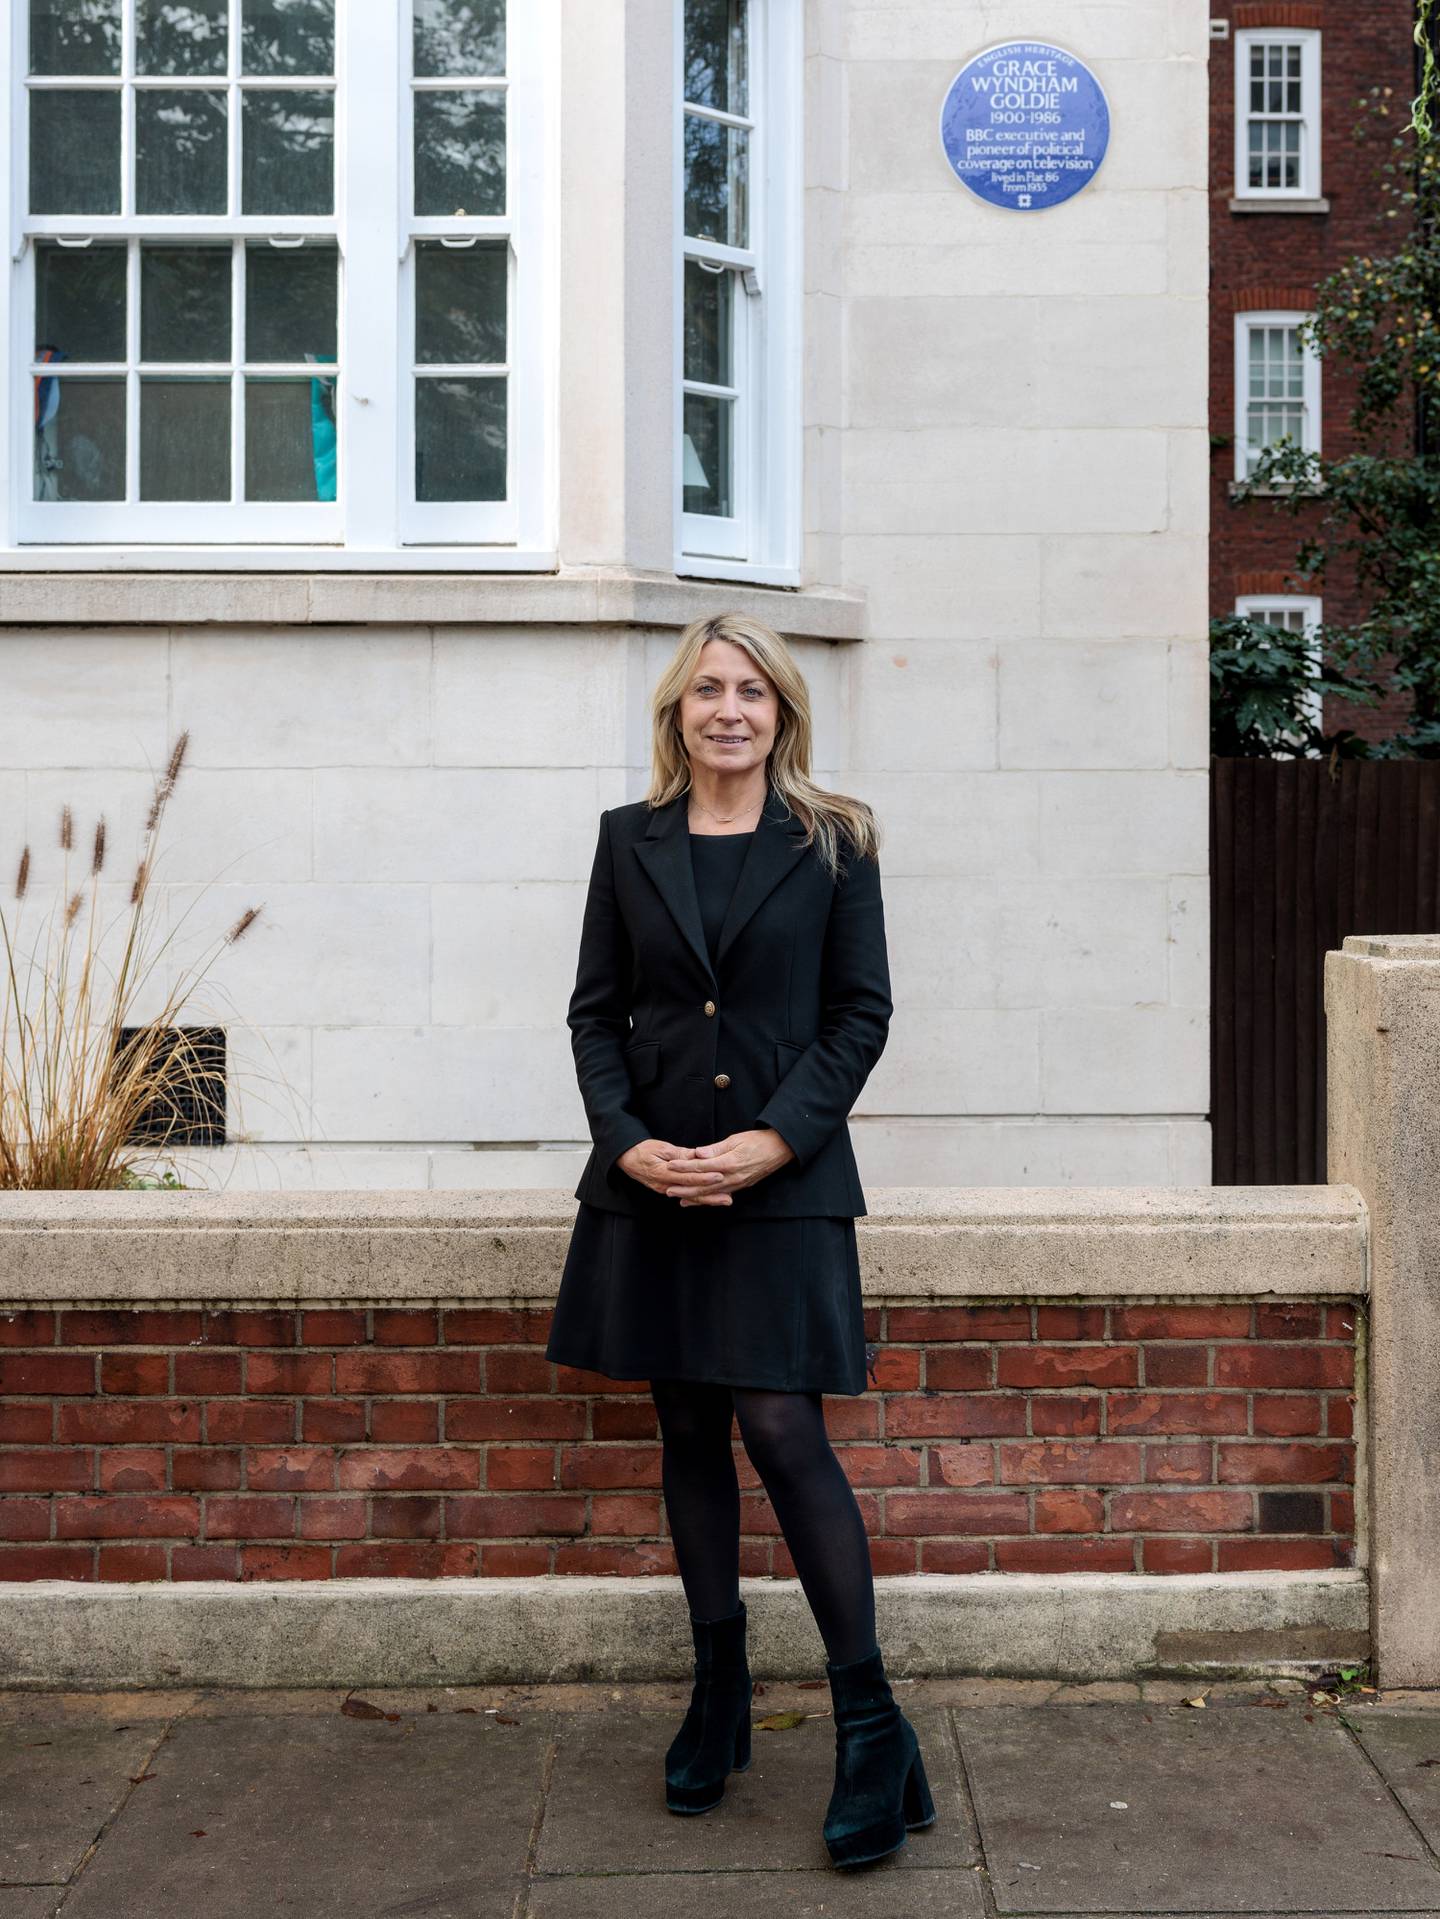 Deborah Turness, chief executive of BBC News, outside St Mary Abbot's Court in Kensington, London, where Grace Wyndham Goldie lived for more than 50 years. PA